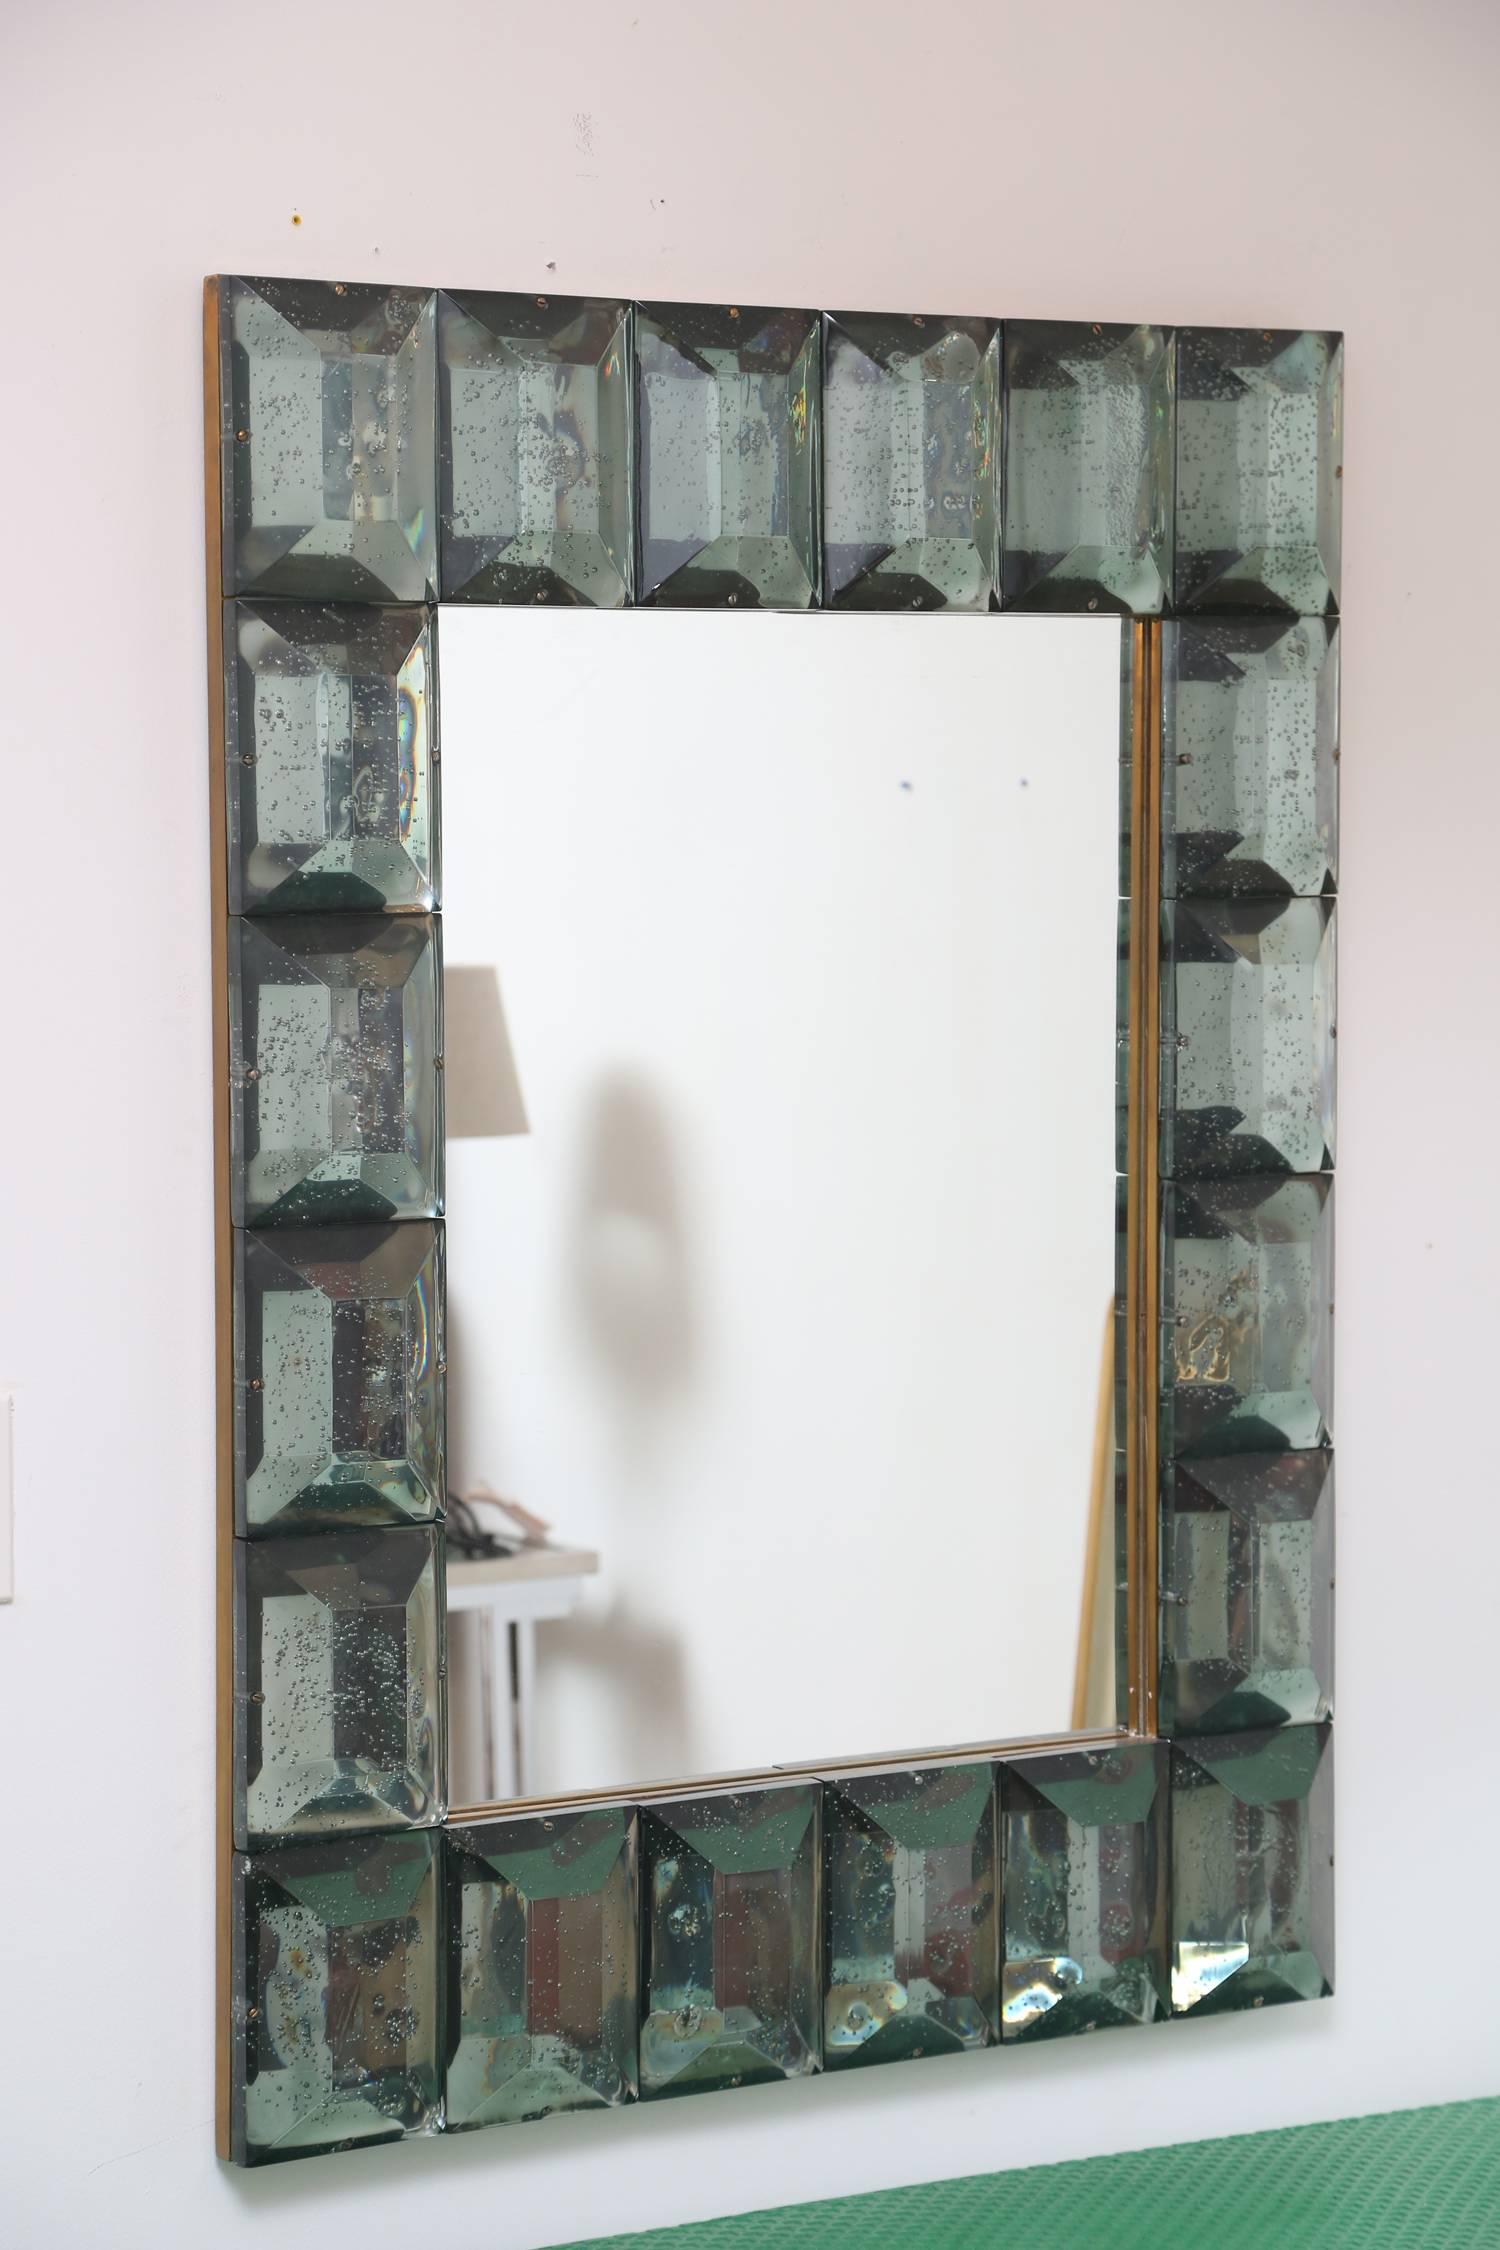 Modern Italian studio built Murano glass and brass frame mirror.
Each aqua green glass block has a highly polished diamond faceted cut pattern with air inclusions throughout. Can be displayed either horizontally or vertically.
Please inquire for